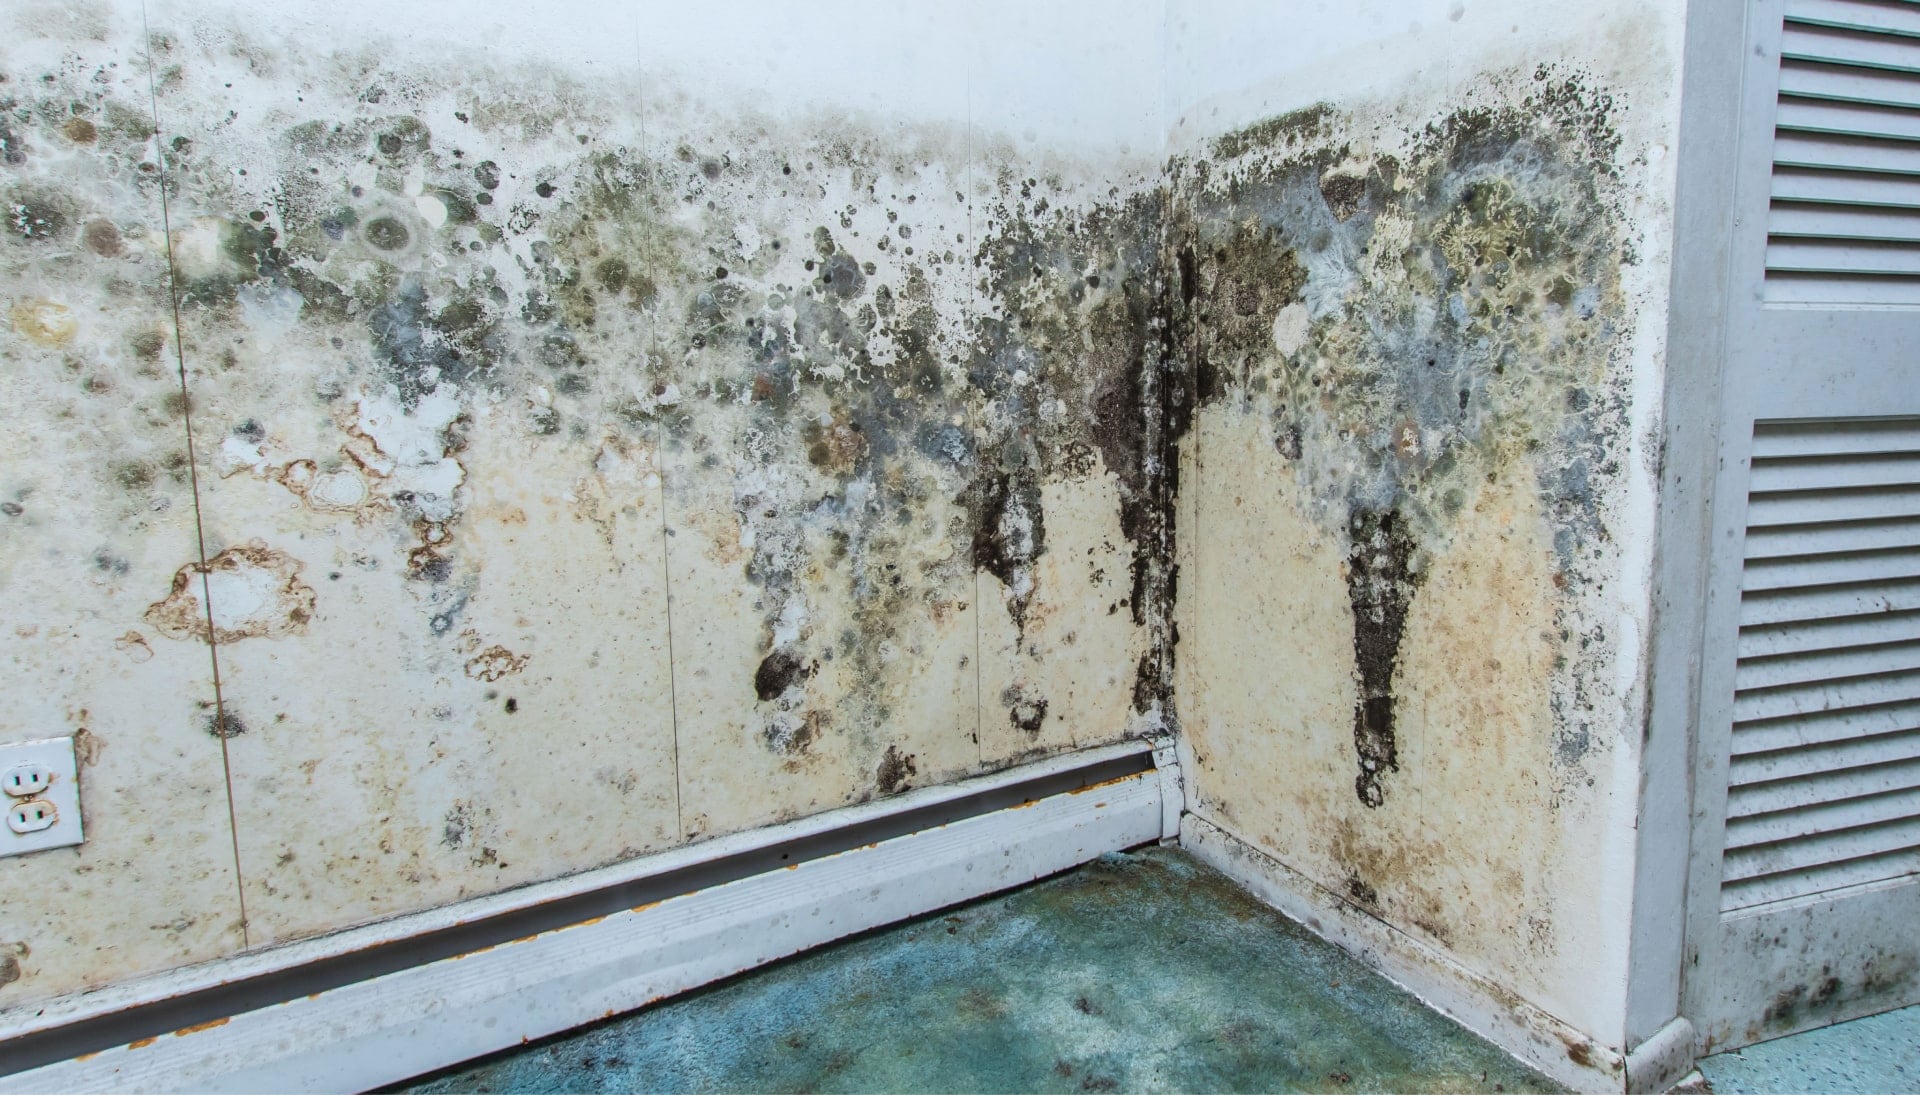 Professional mold removal, odor control, and water damage restoration service in Grand Rapids, Michigan.